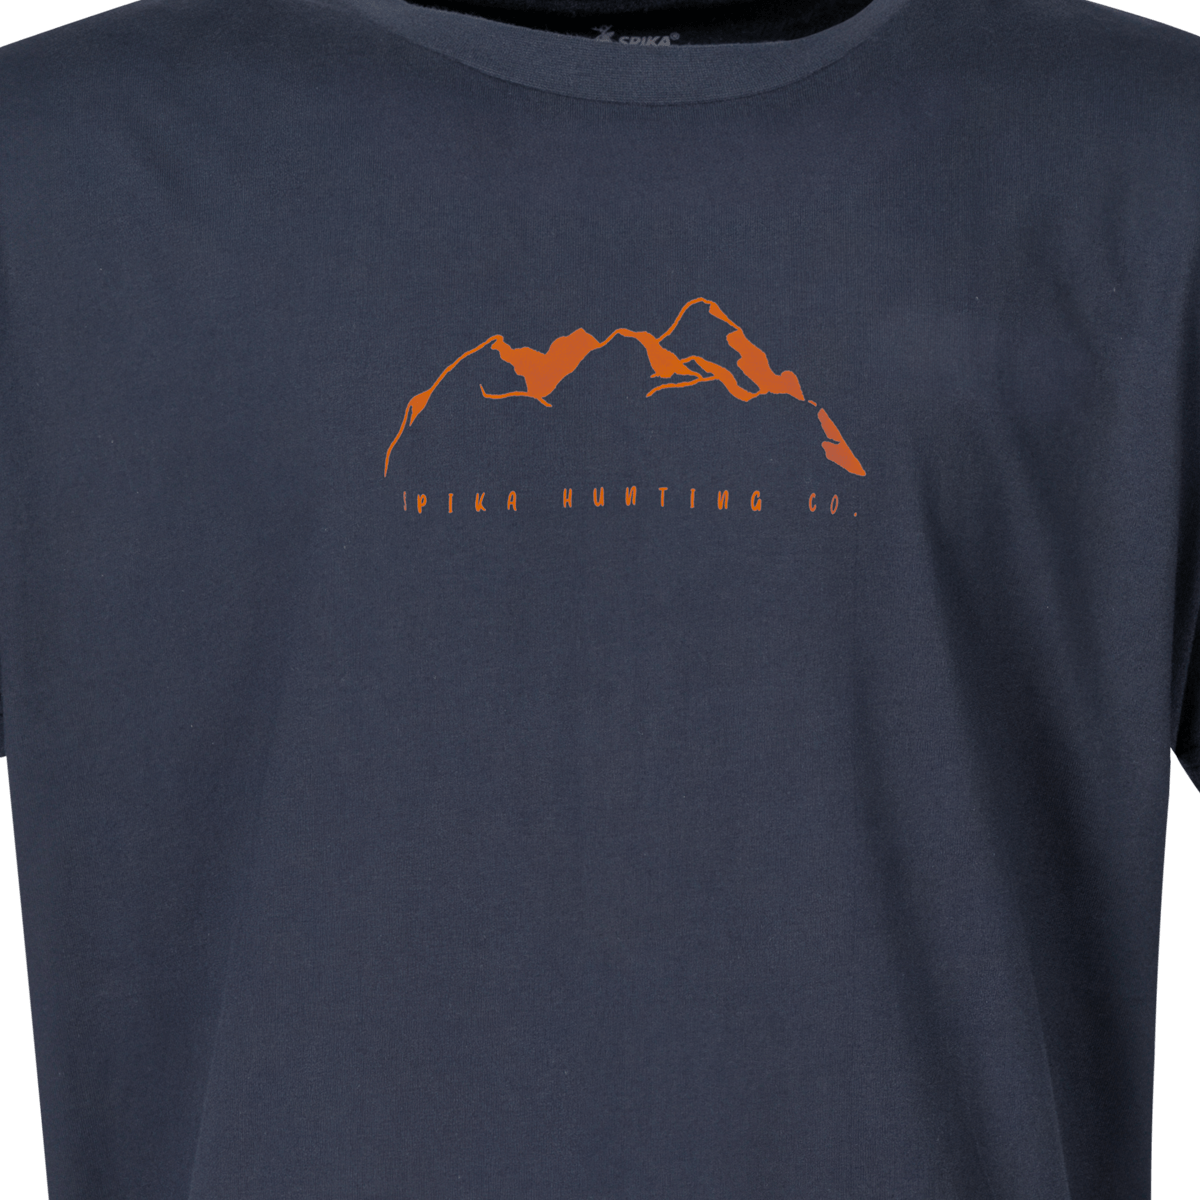 Spika Go Mountain T-Shirt - Navy -  - Mansfield Hunting & Fishing - Products to prepare for Corona Virus